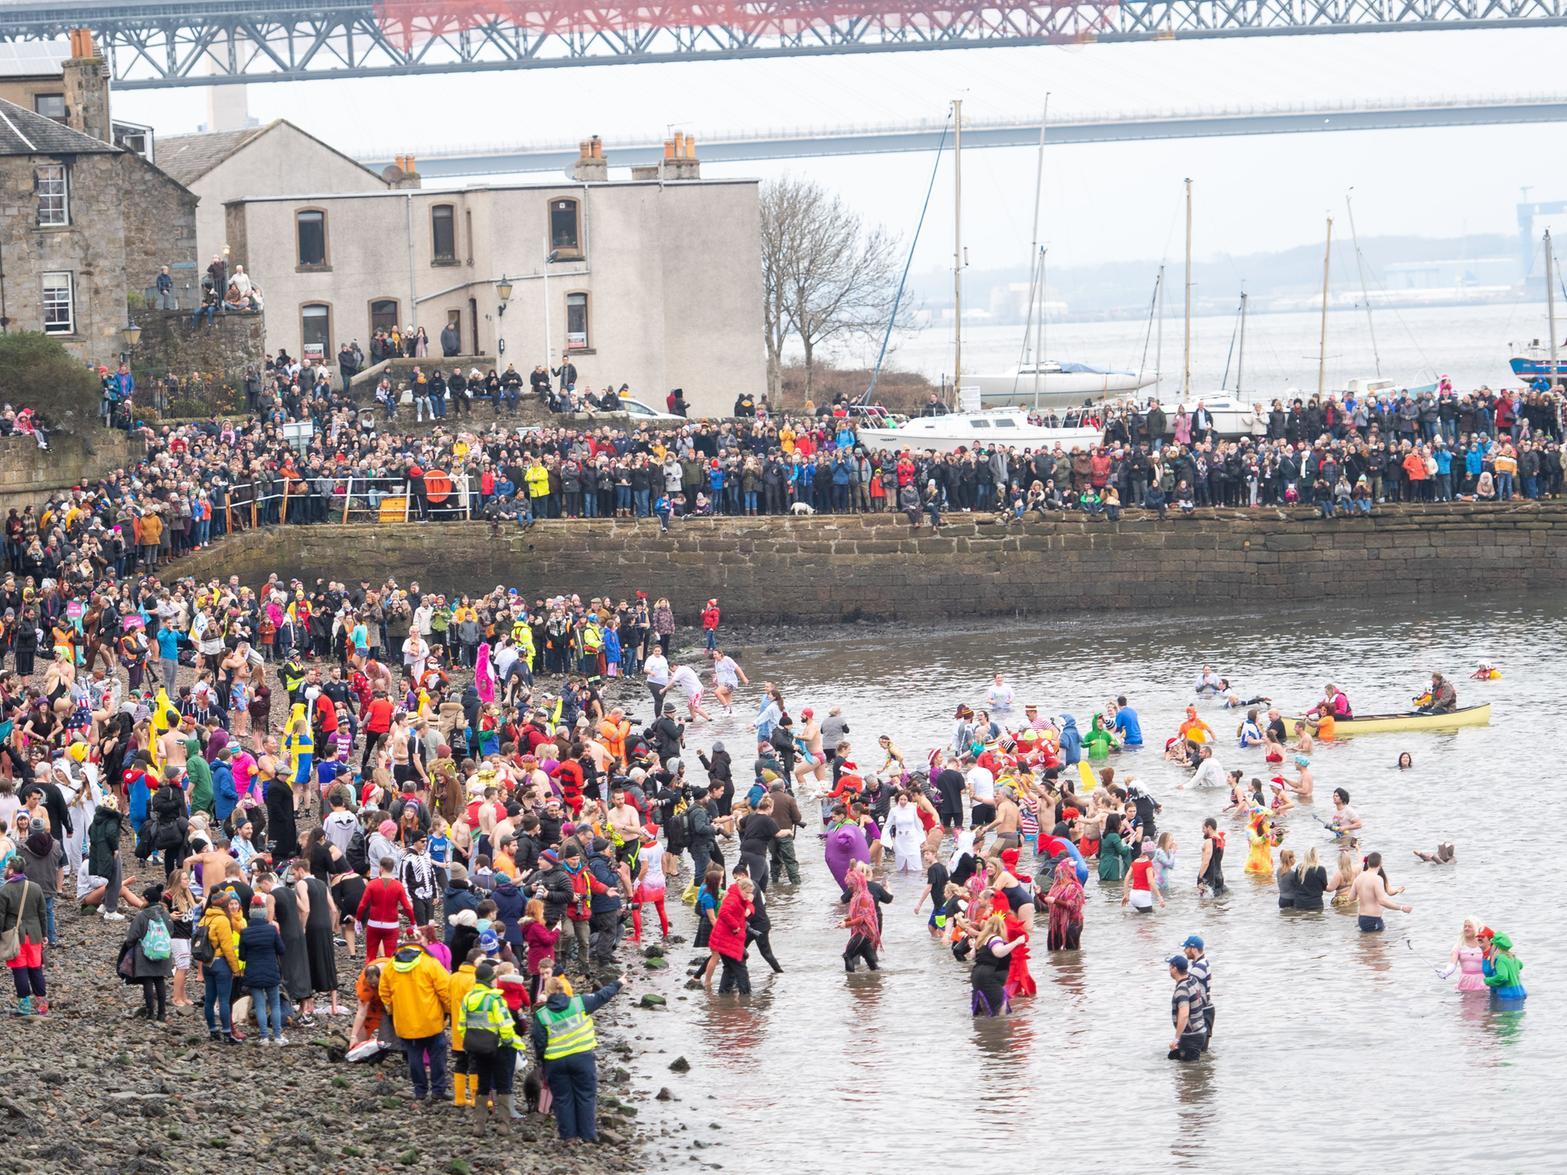 The New Year's Day tradition at South Queensferry, which dates back to 1987, saw all participants parading through its historic streets before entering the water.